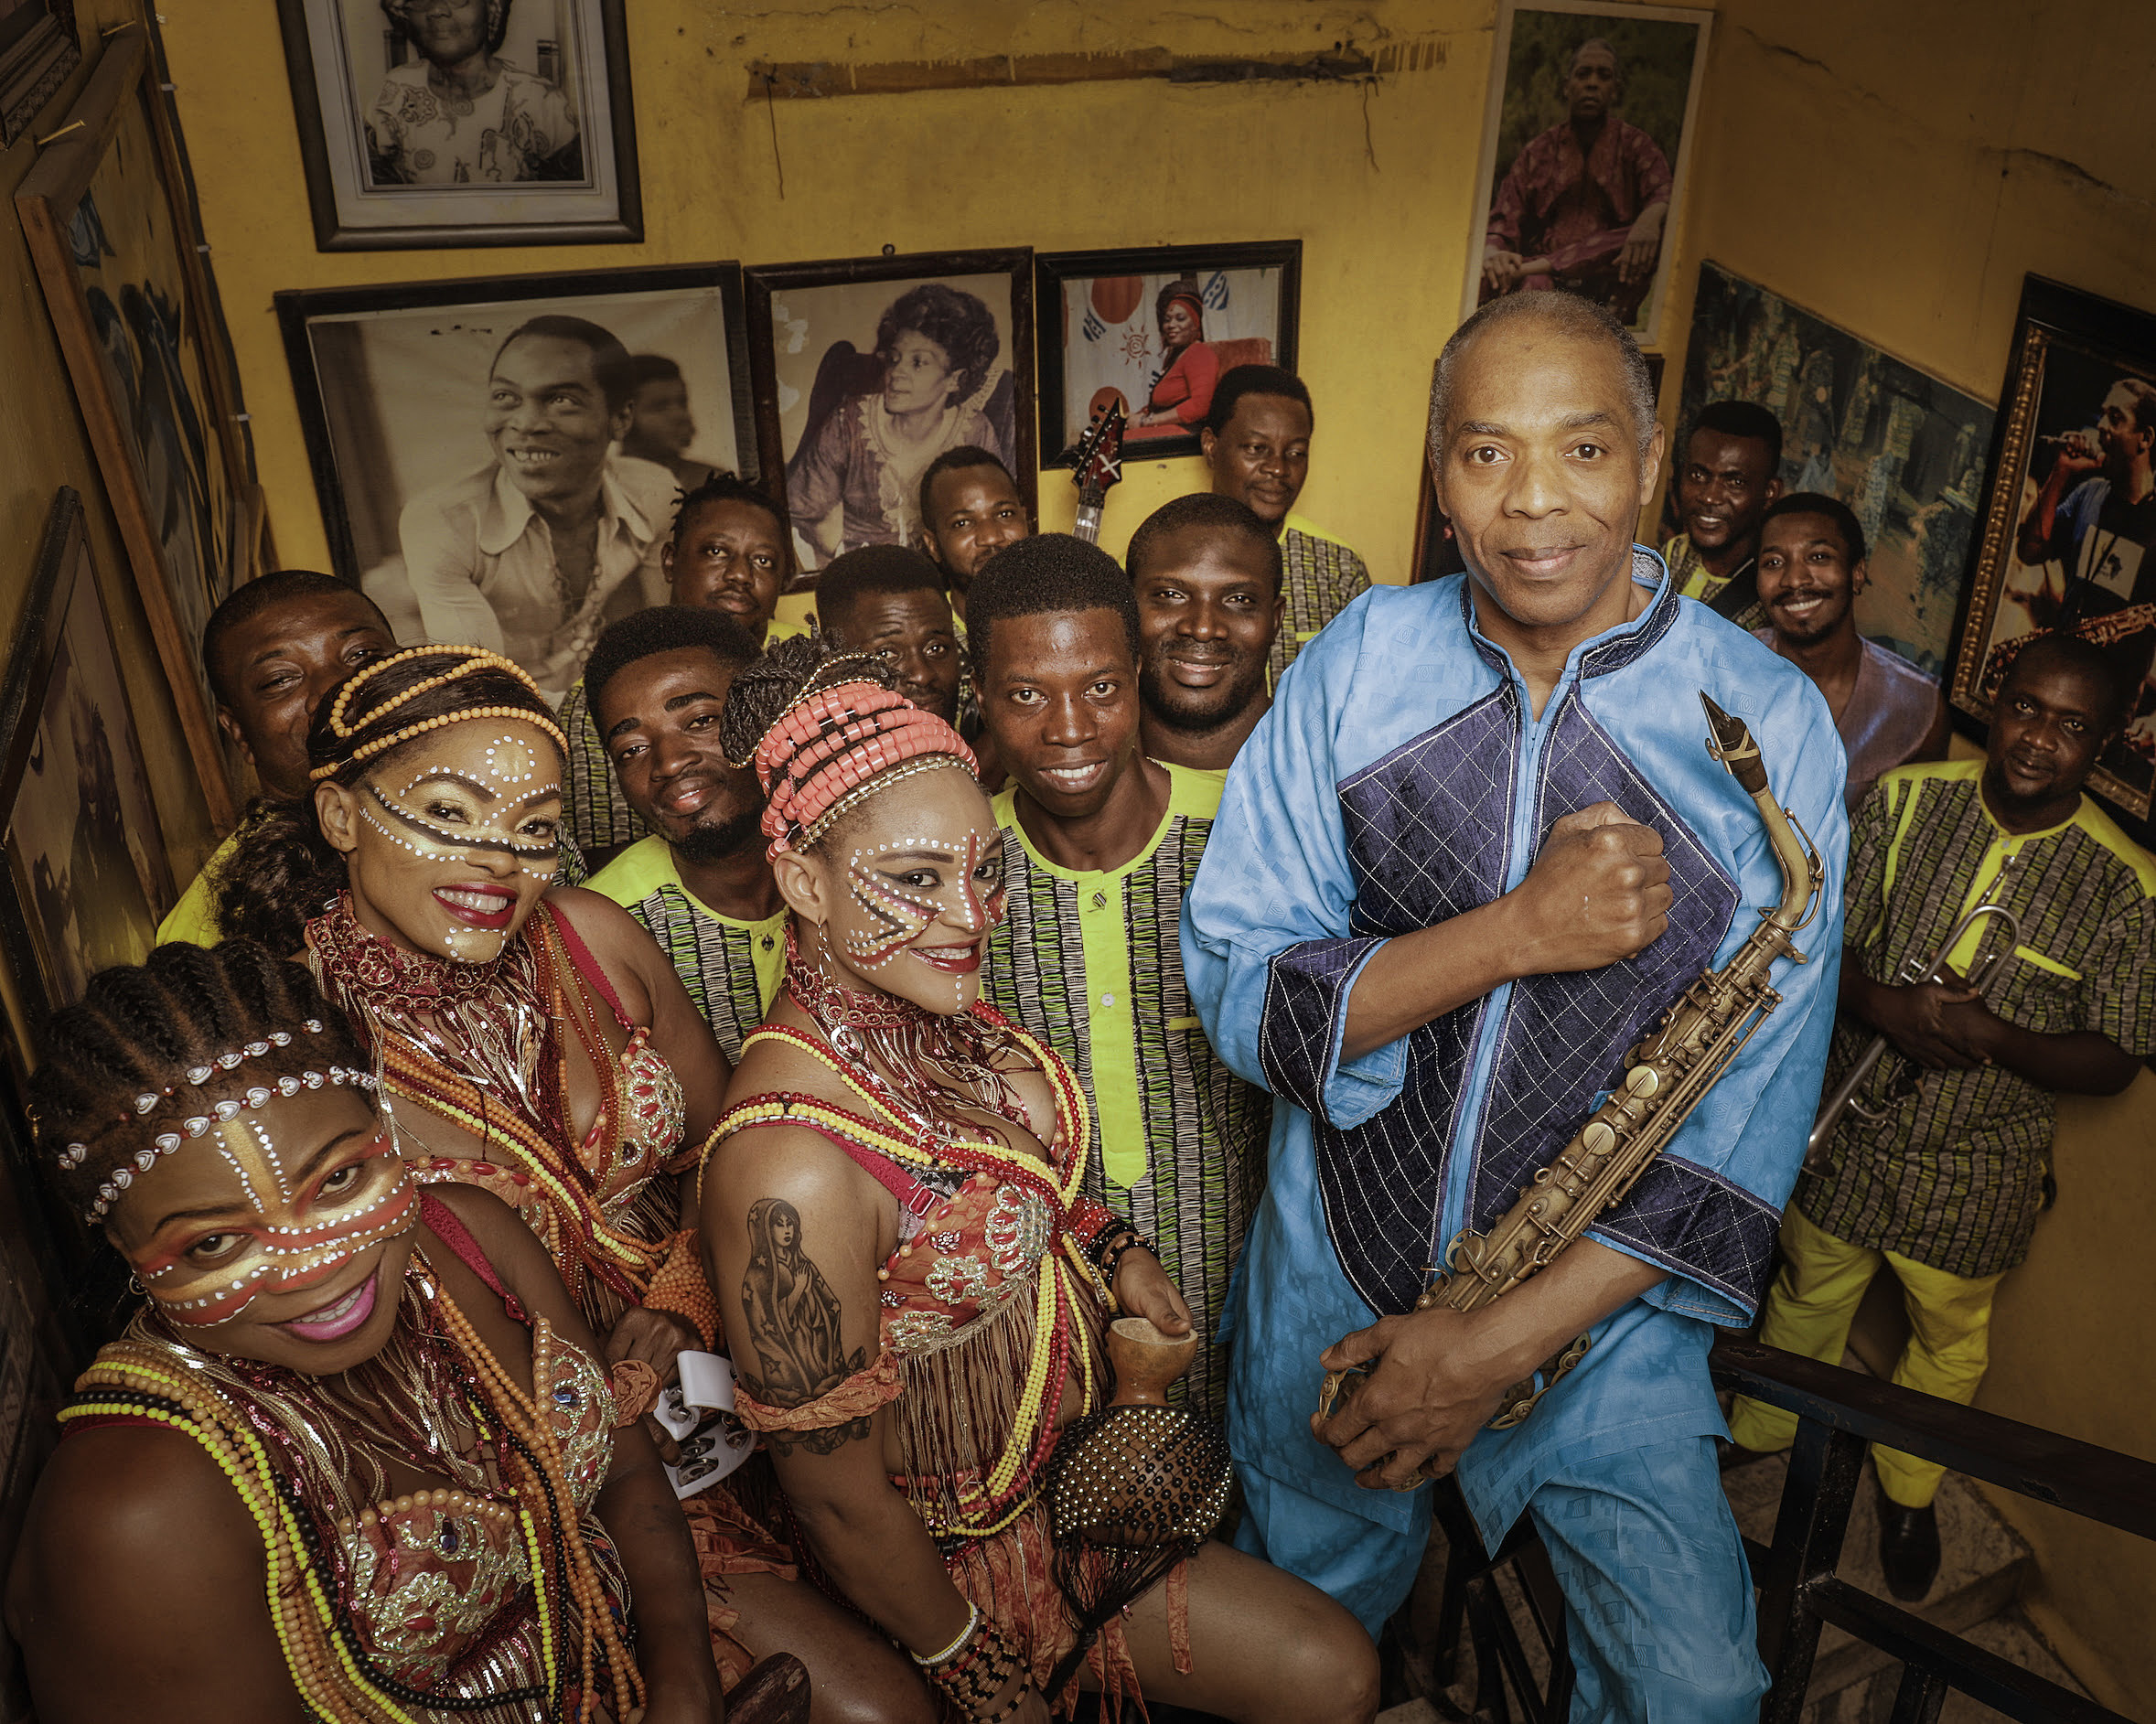 Femi Kuti's “Africa for Africa” coming to North America (MP3, Take Away  Shows & 2011 Tour Dates)